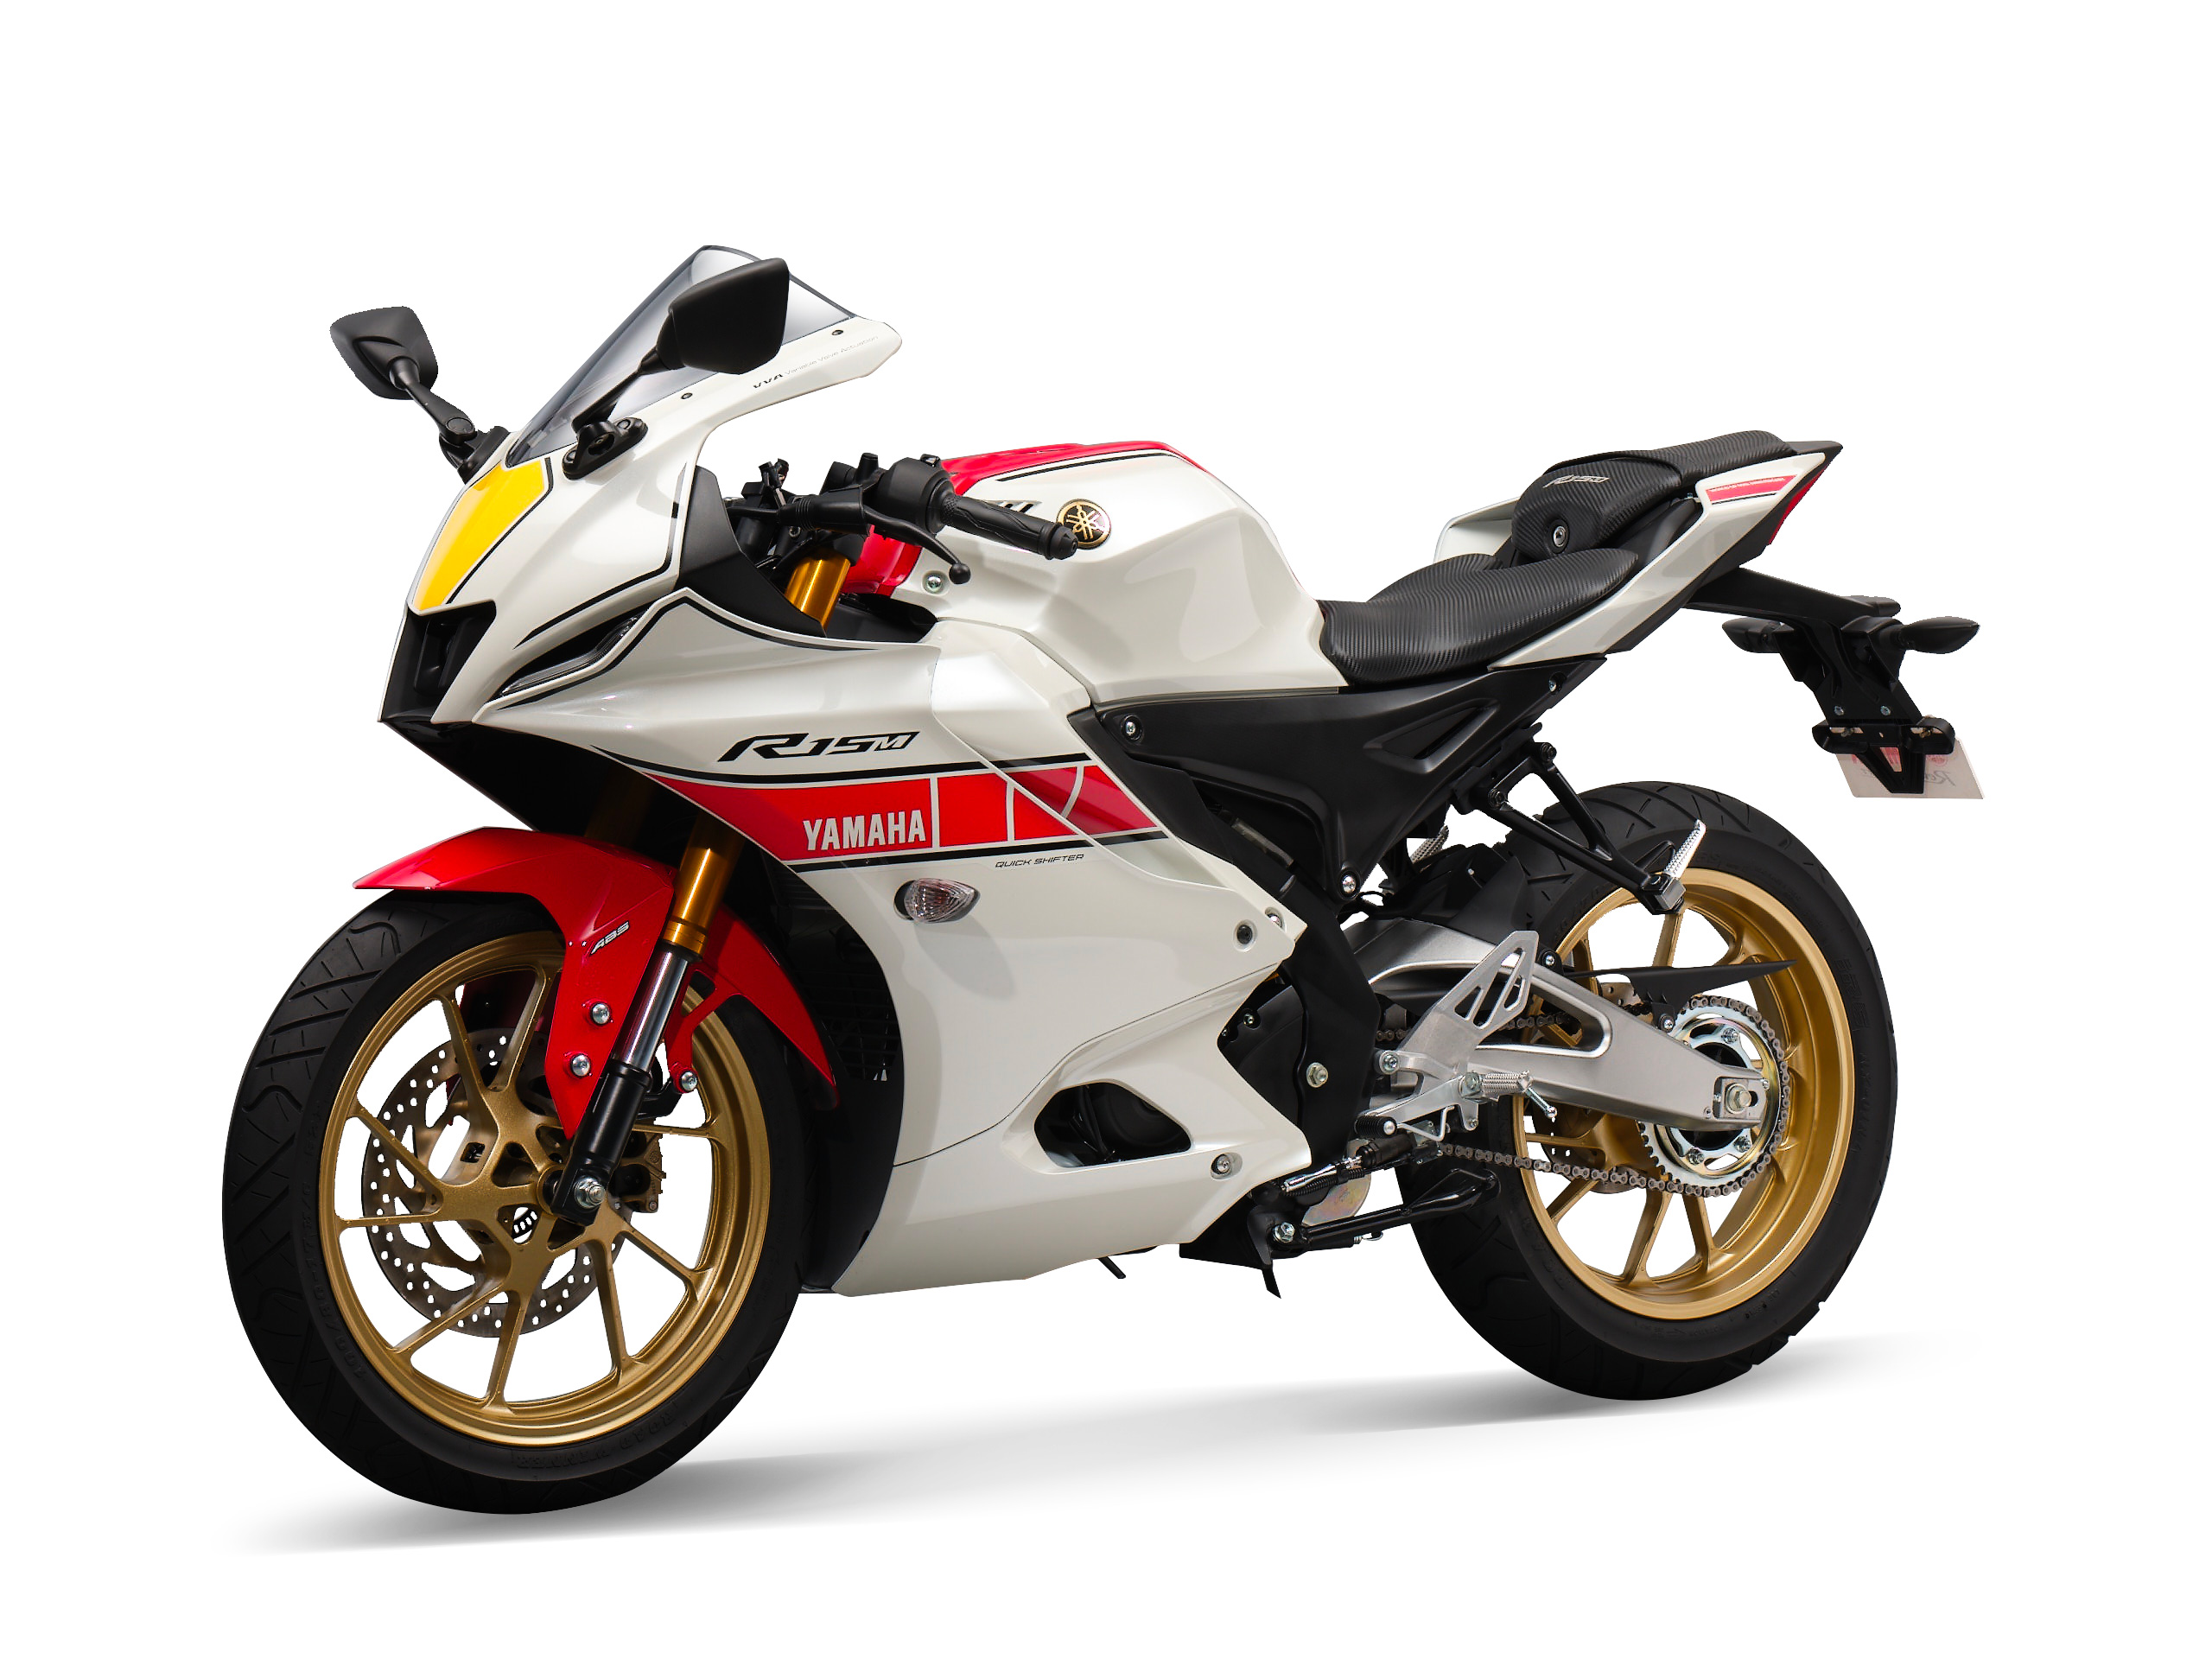 Yamaha's 2023 YZF-R15M motorcycle on a white background